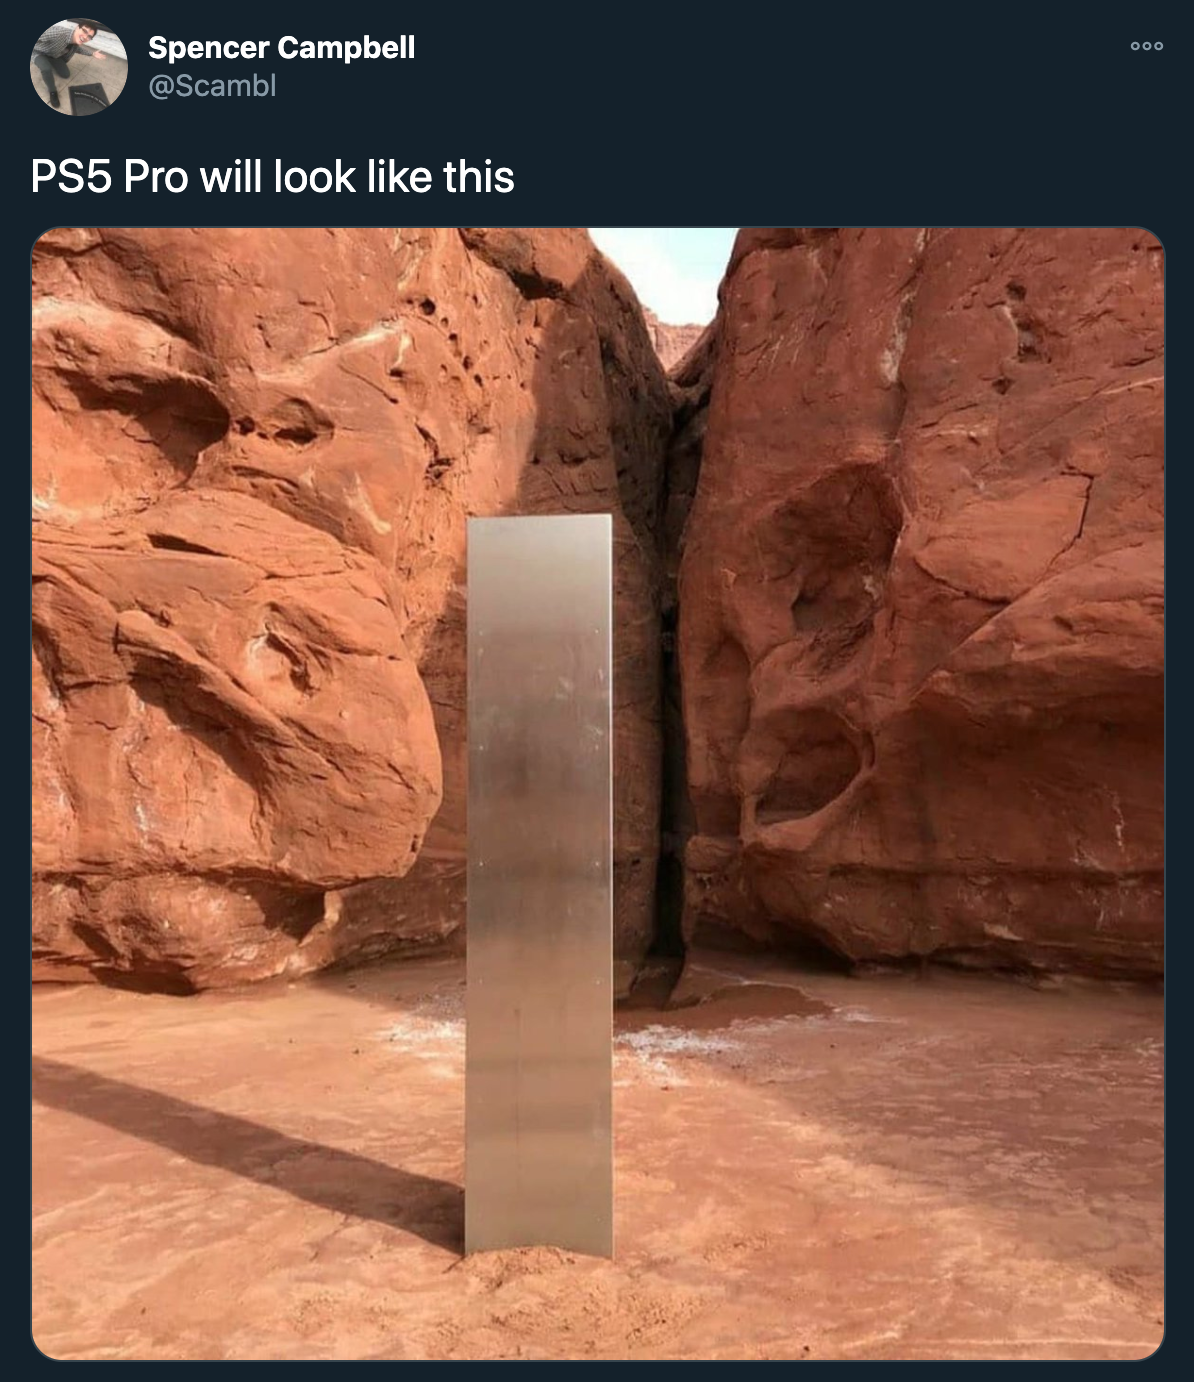 ps5 pro reactions - PS5 Pro will look this